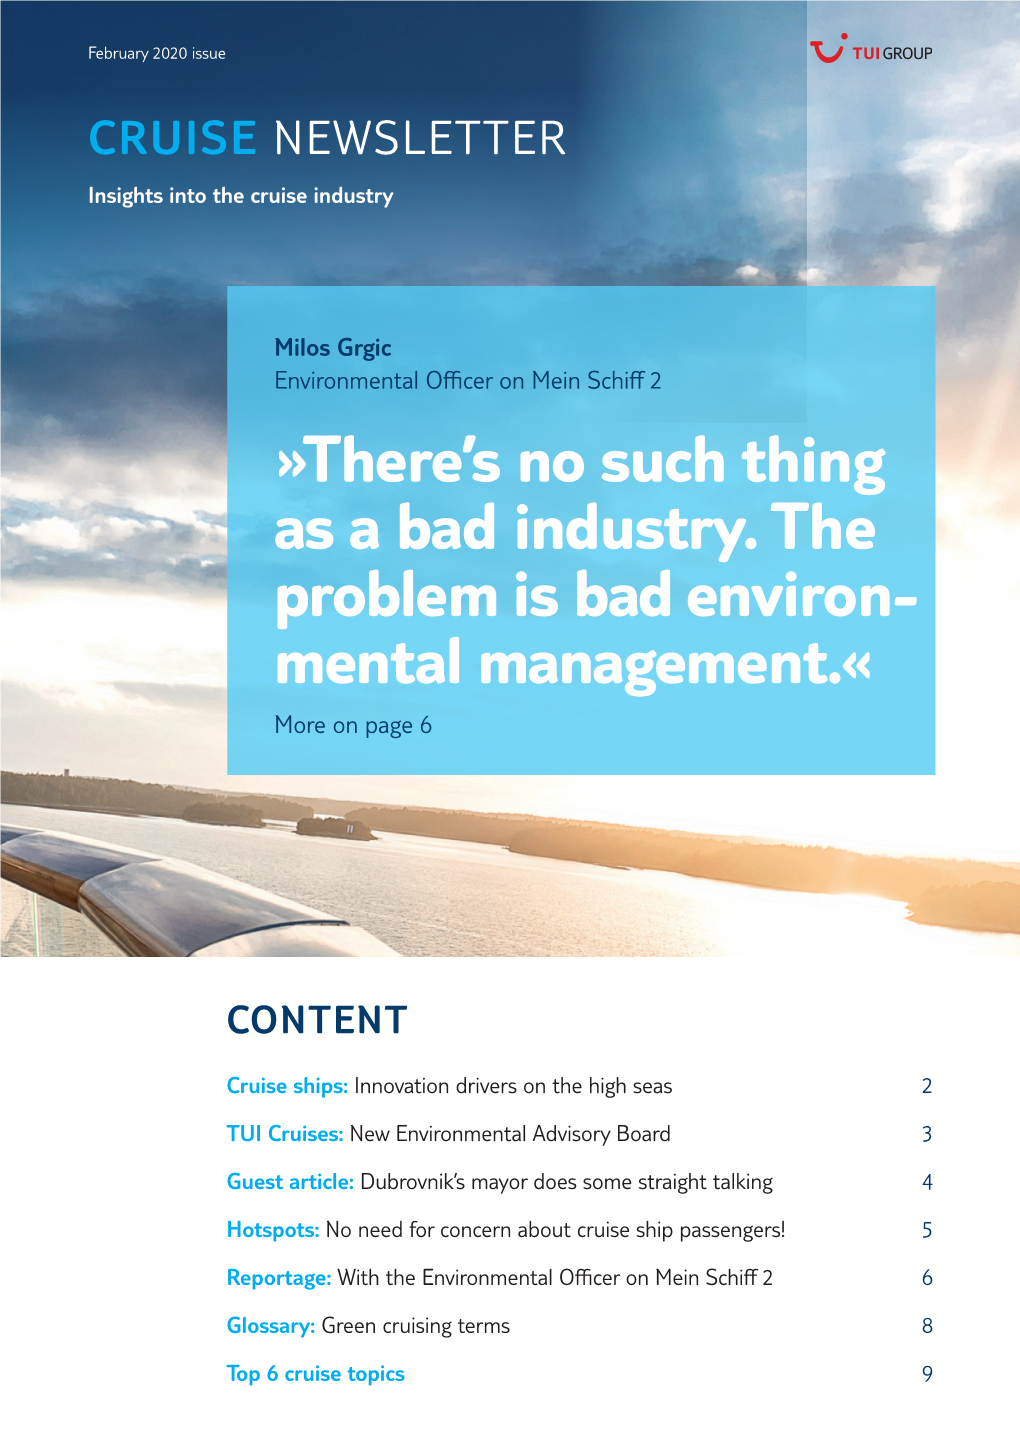 There's No Such Thing As a Bad Industry. the Problem Is Bad Environ- Mental Management.«